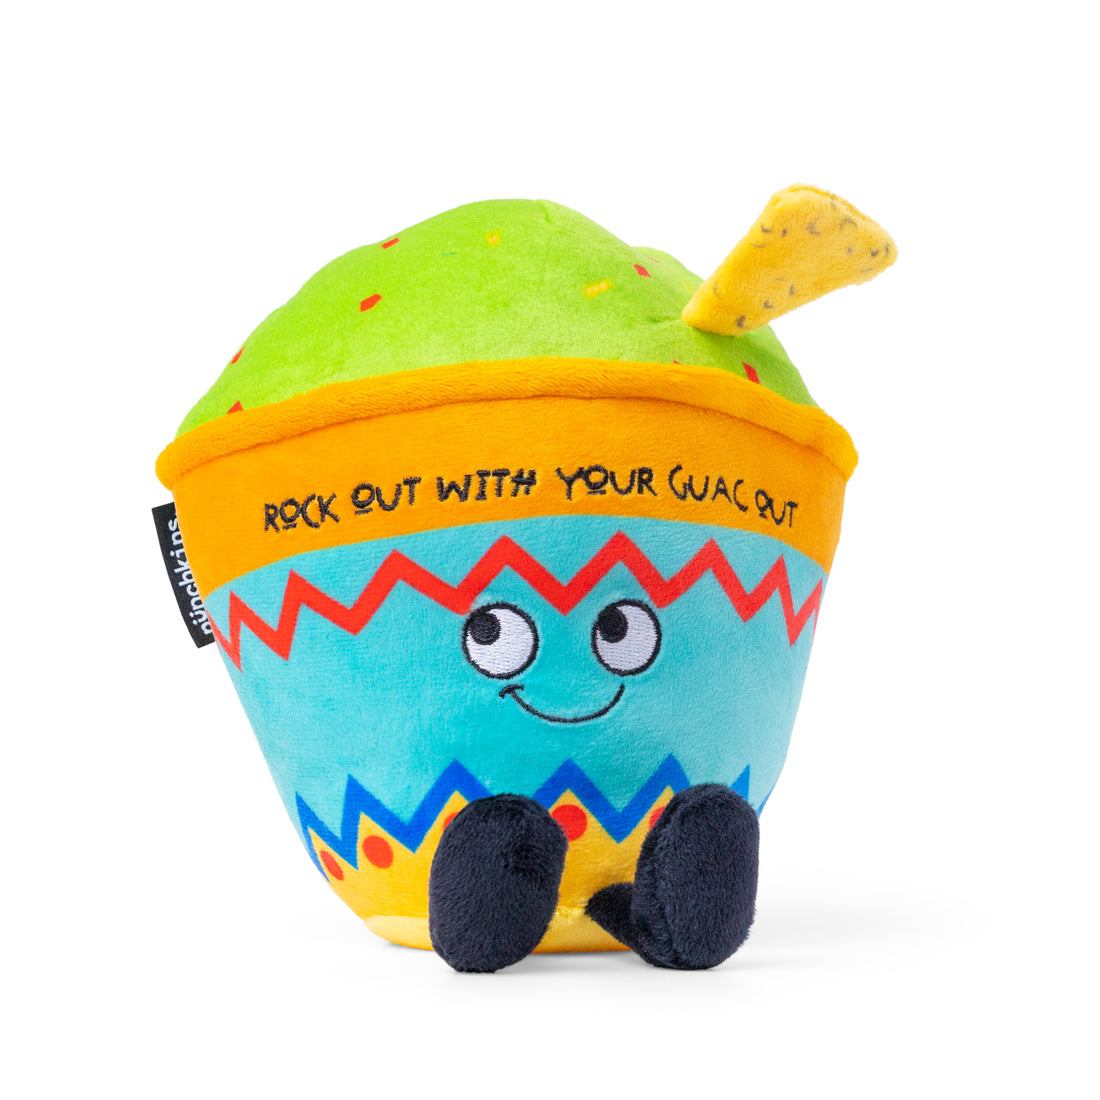 &quot;Rock Out With Your Guac Out&quot; Plush Guacamole